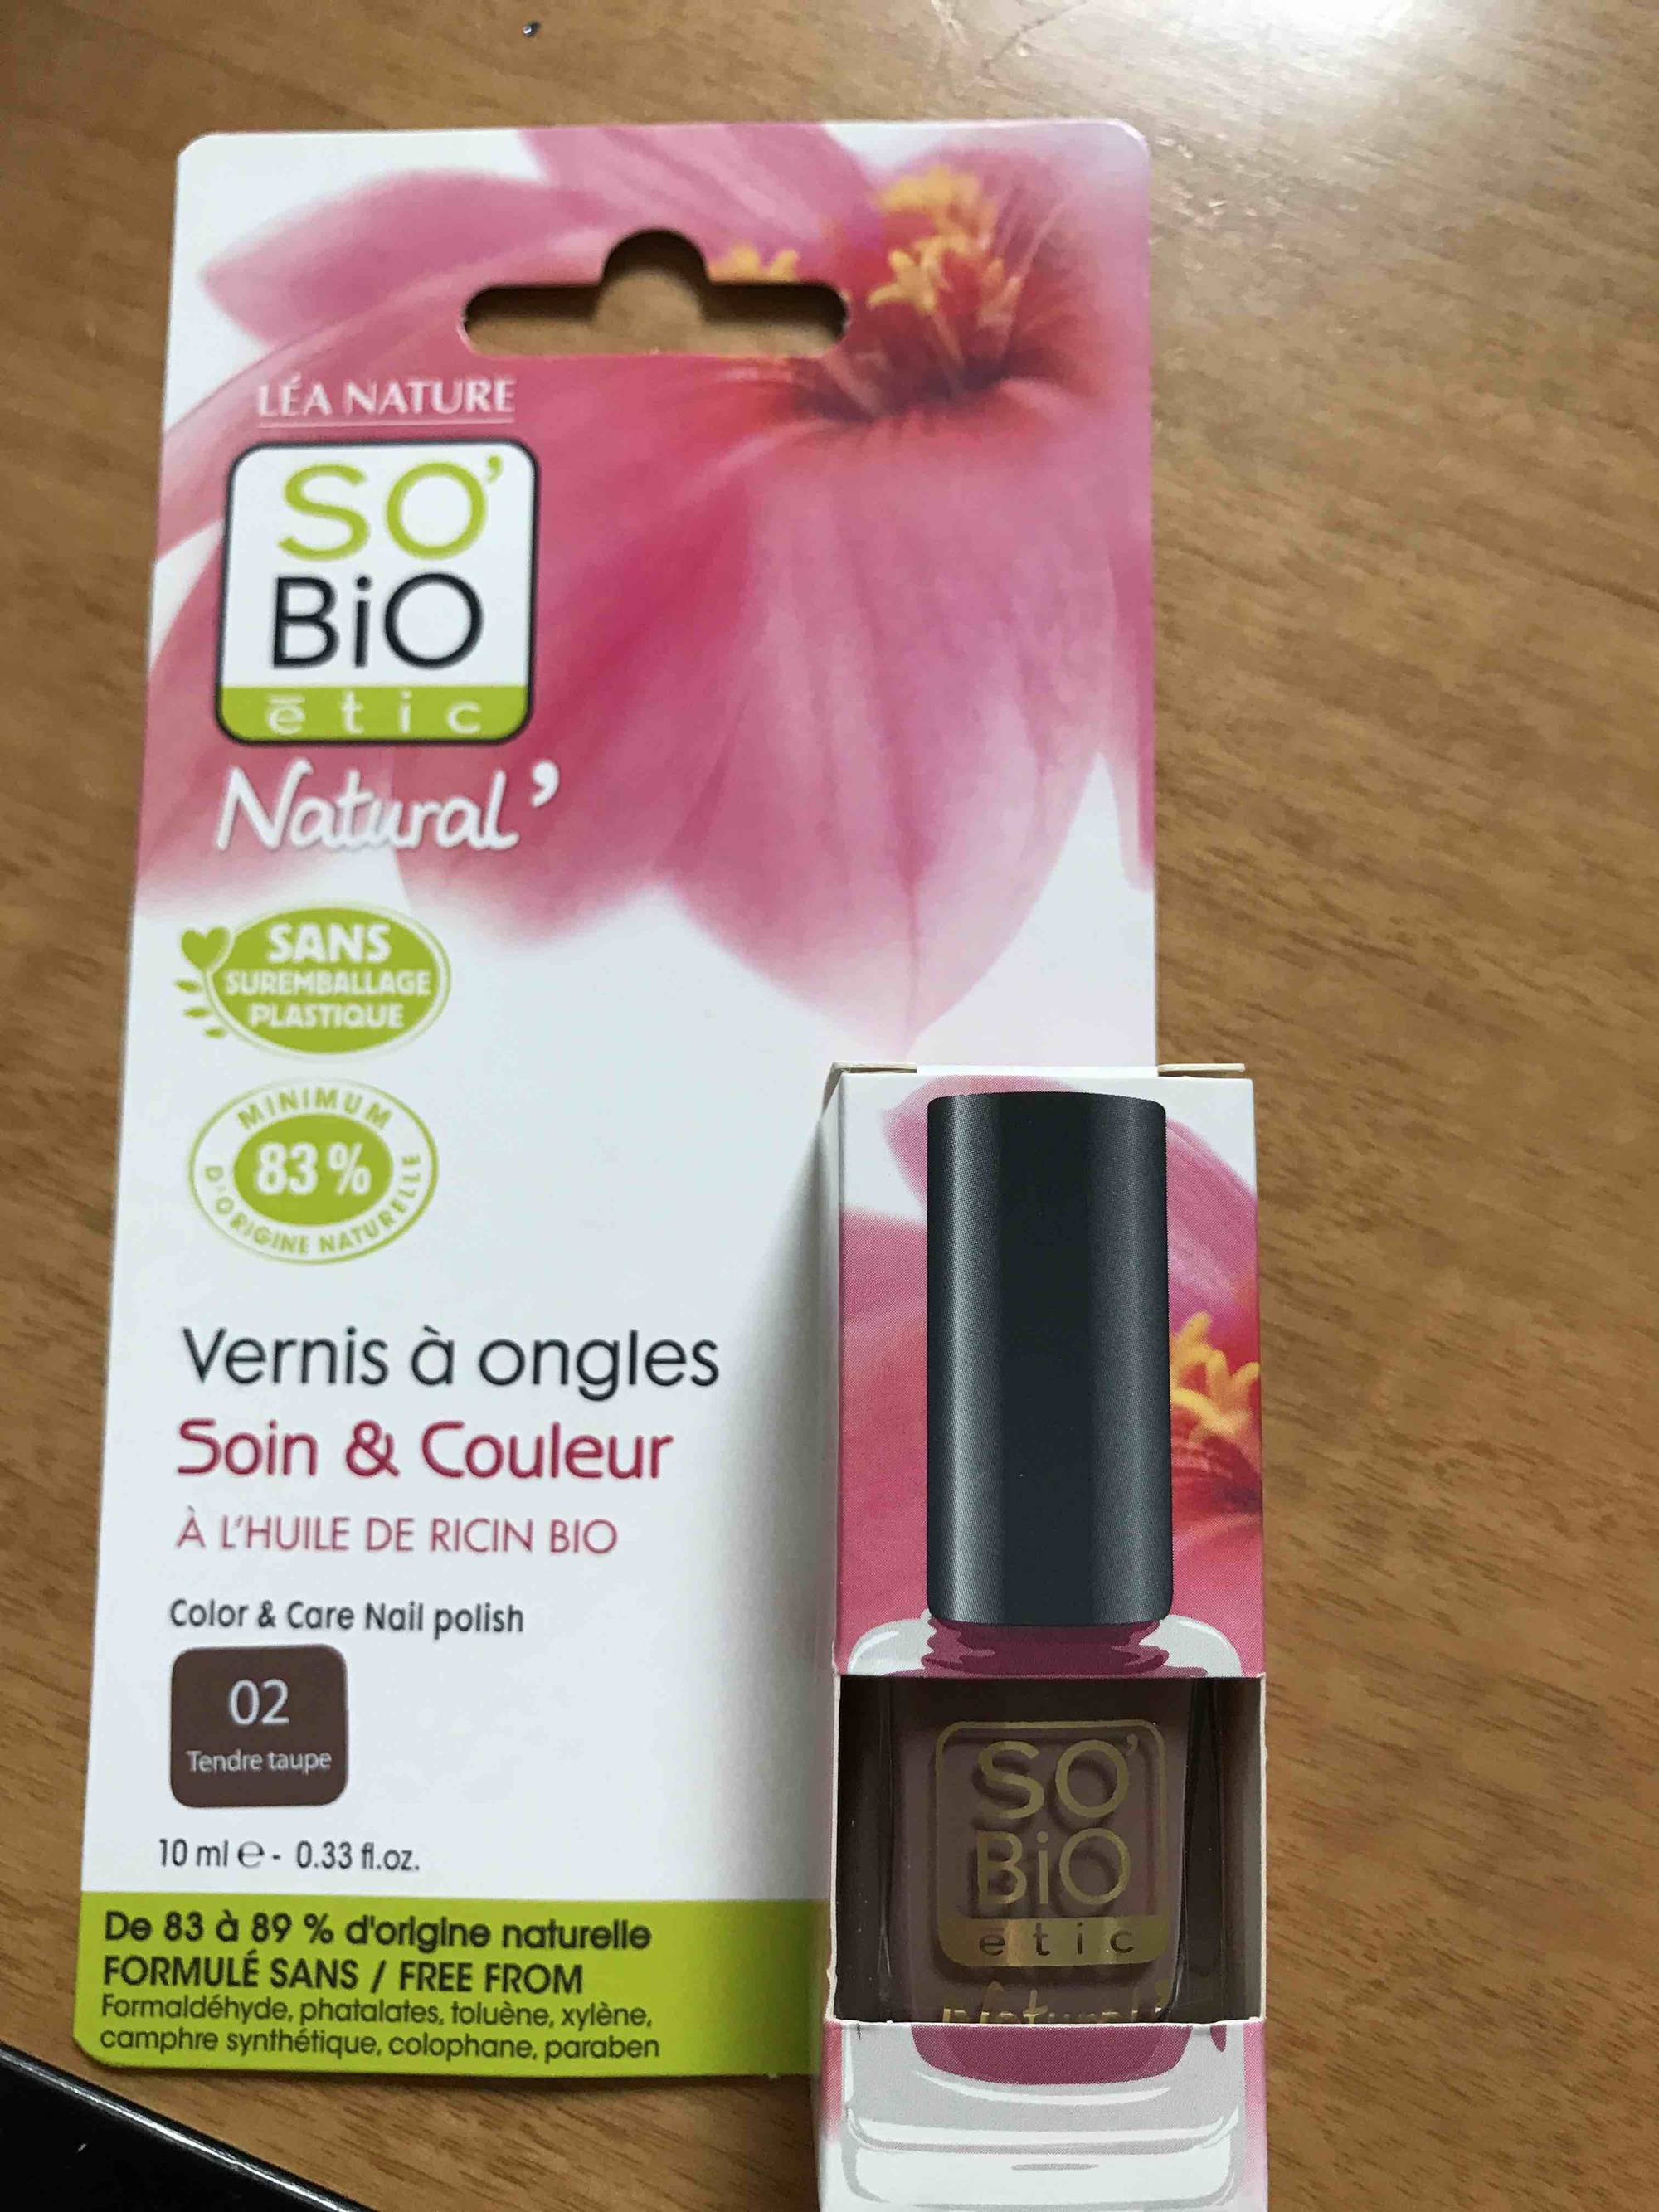 Vente Vernis à ongles - 65 Rose nude - Maquillage - Léa Nature